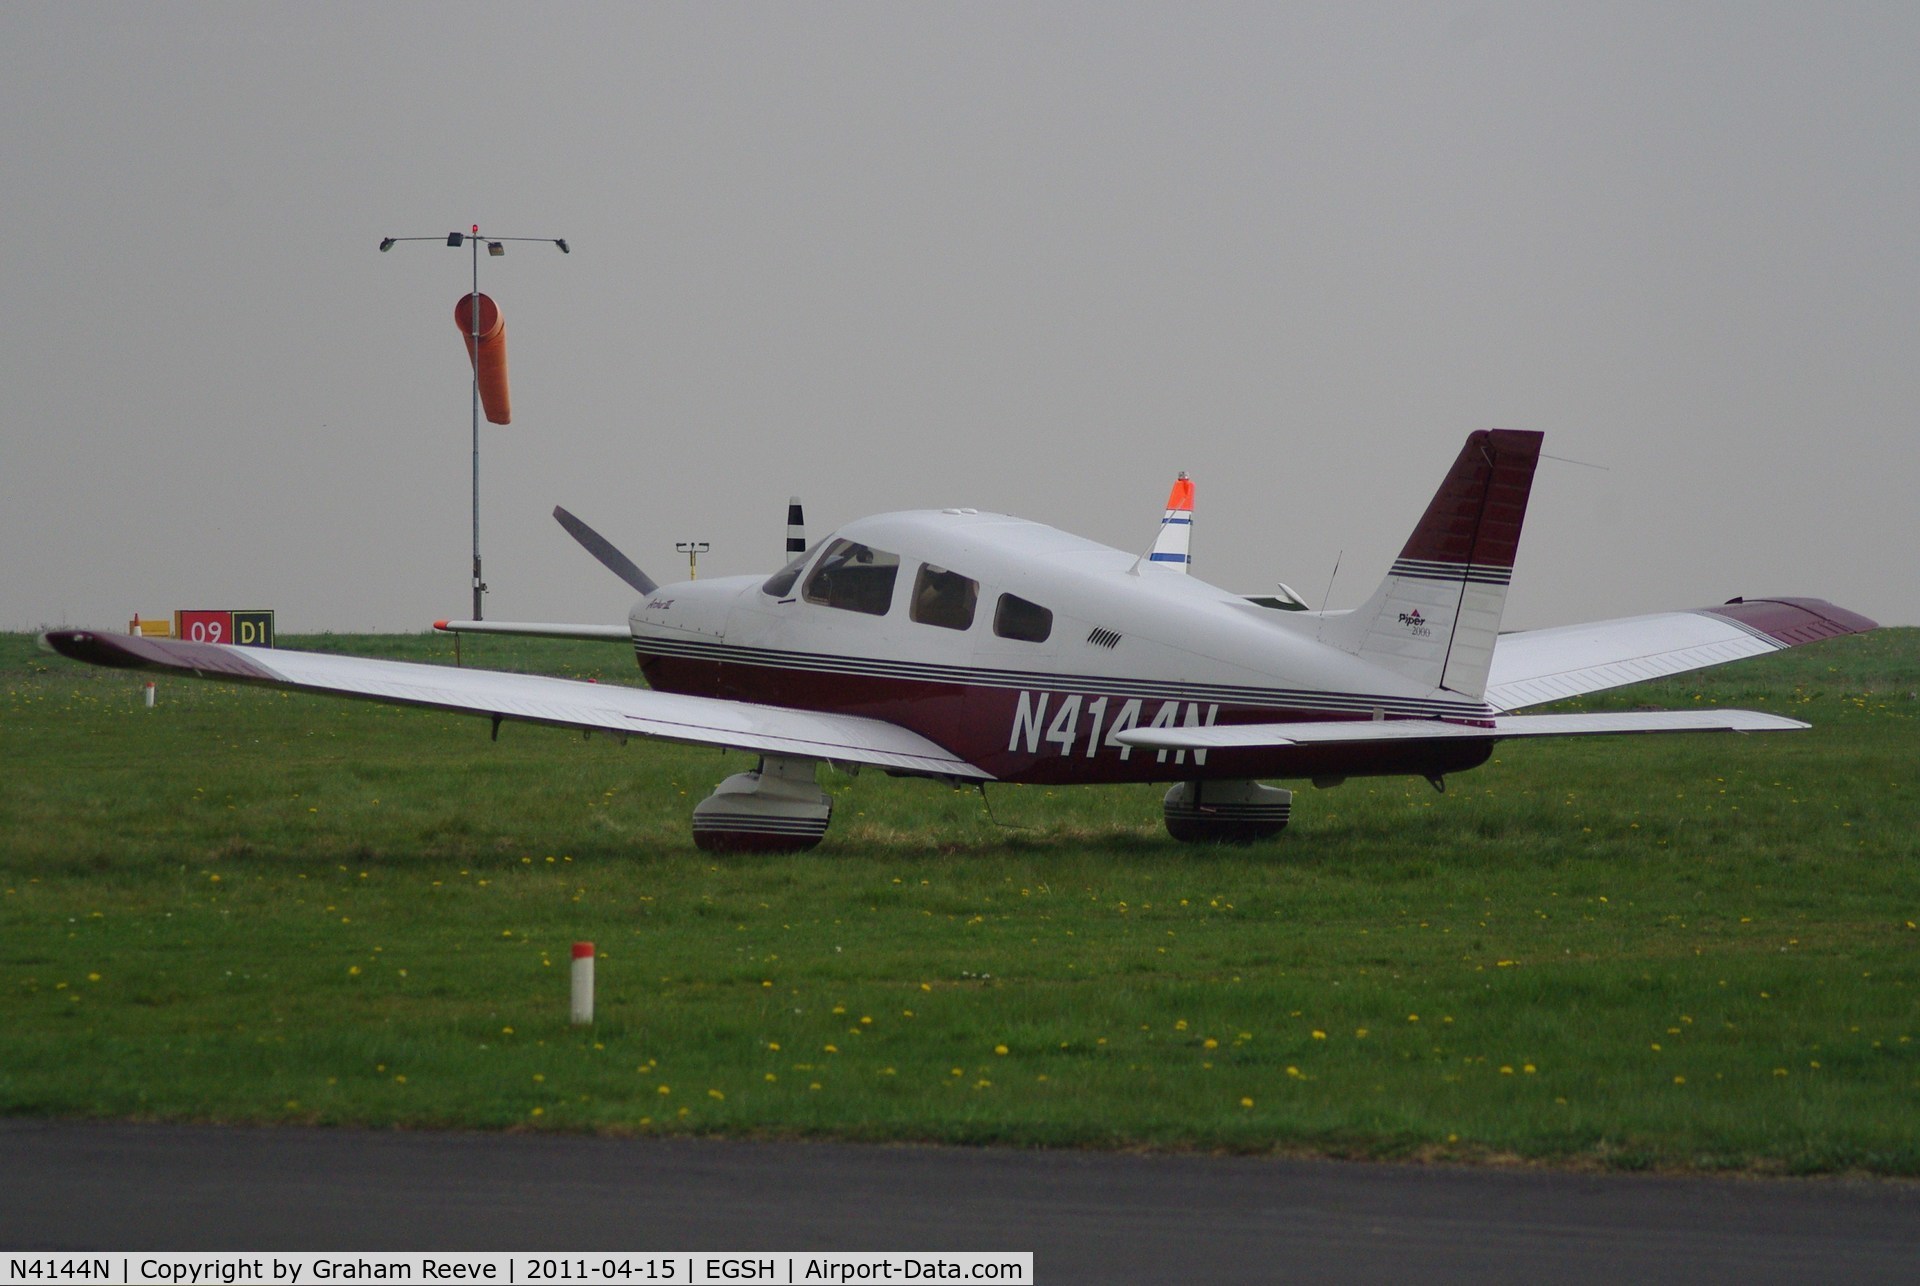 N4144N, 2000 Piper PA-28-181 Cherokee Archer III C/N 2843361, Parked at Norwich.